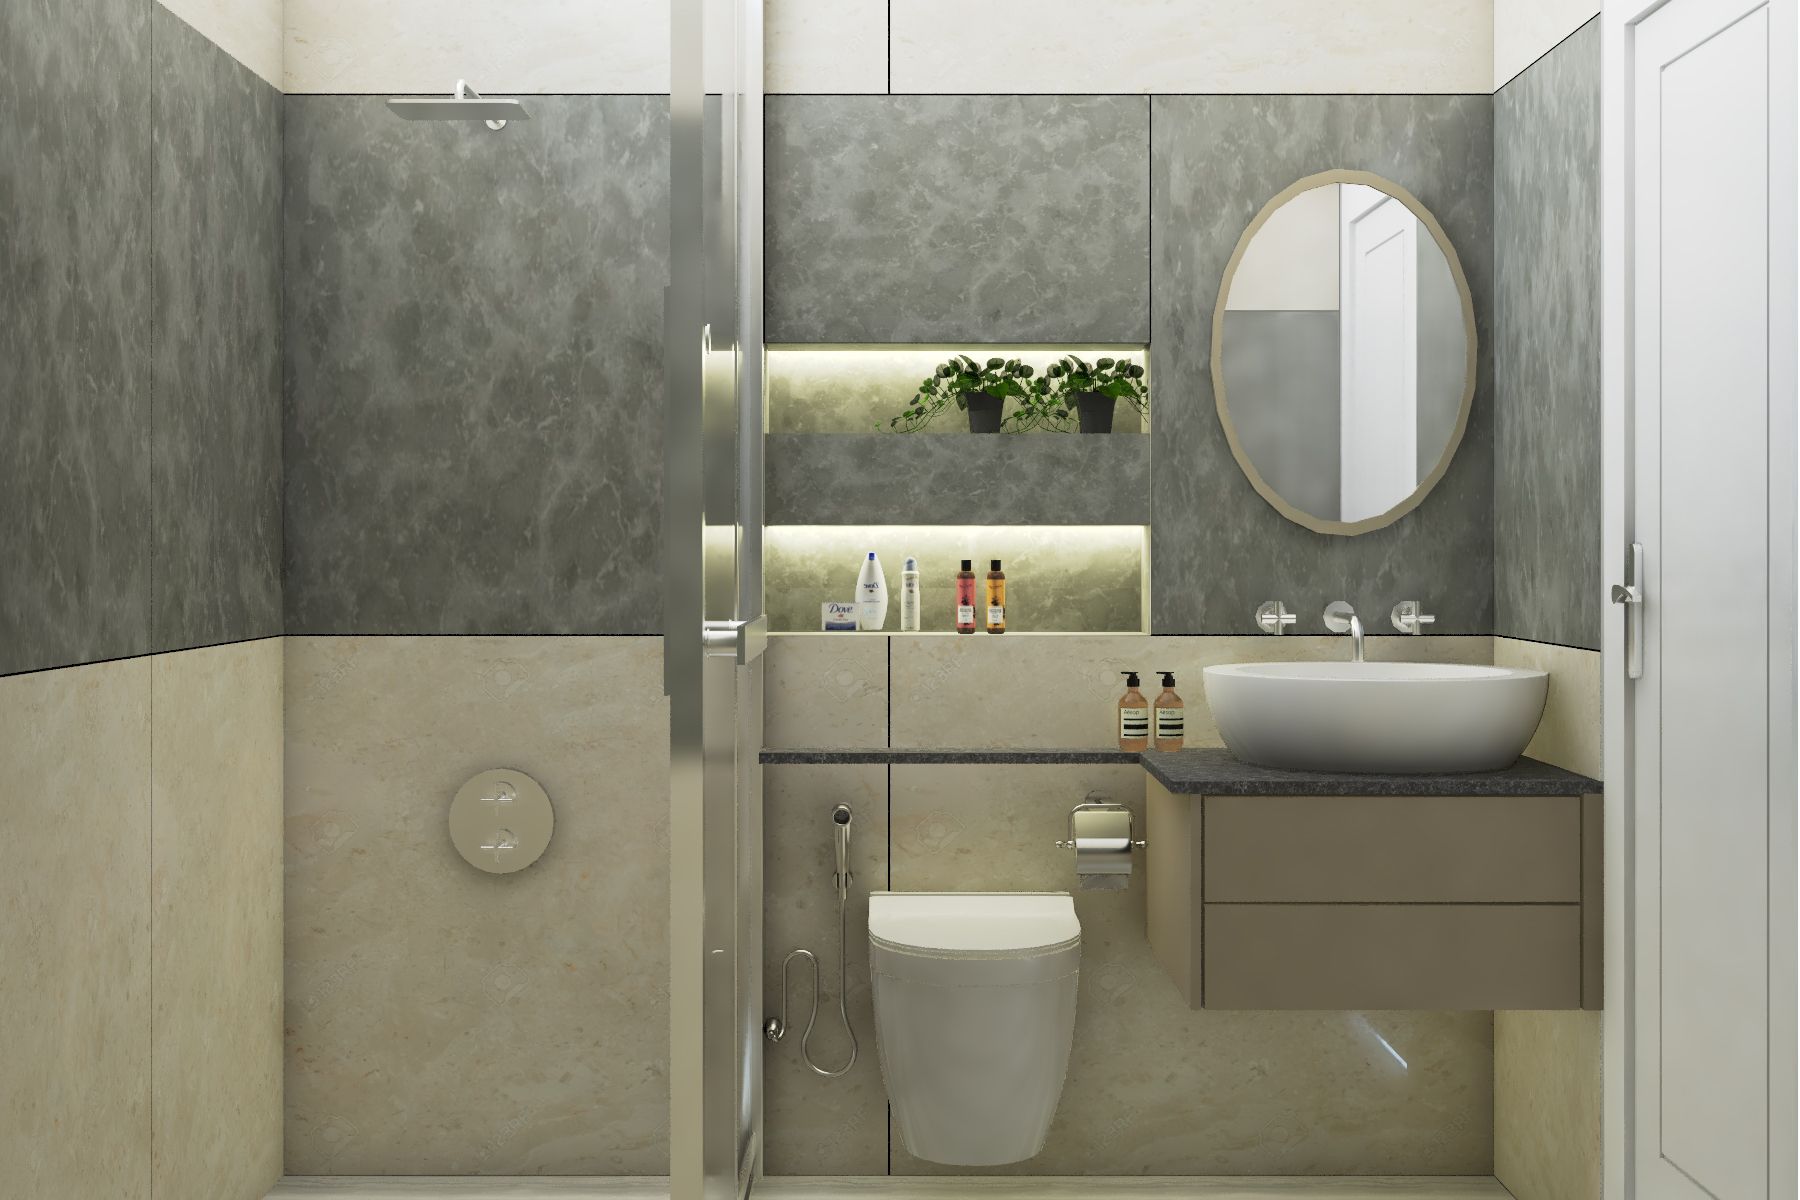 Contemporary Bathroom Design With An Oval-Shaped Mirror